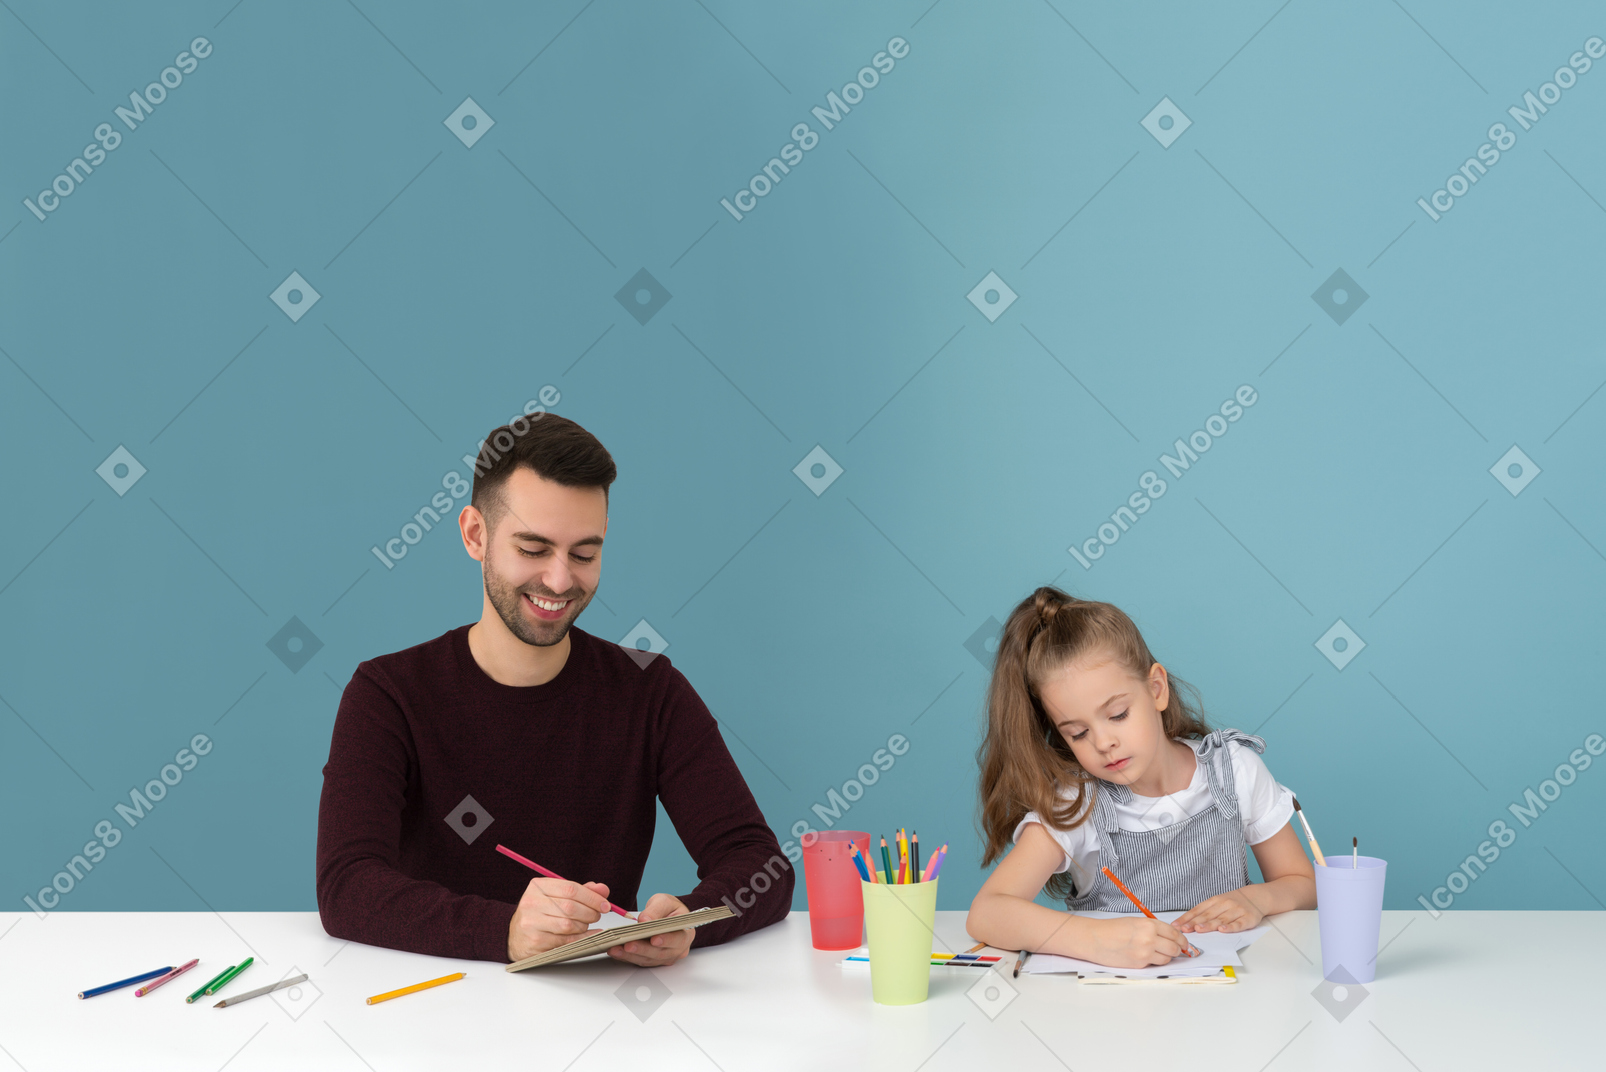 Dad and daughter are trying their best at drawing